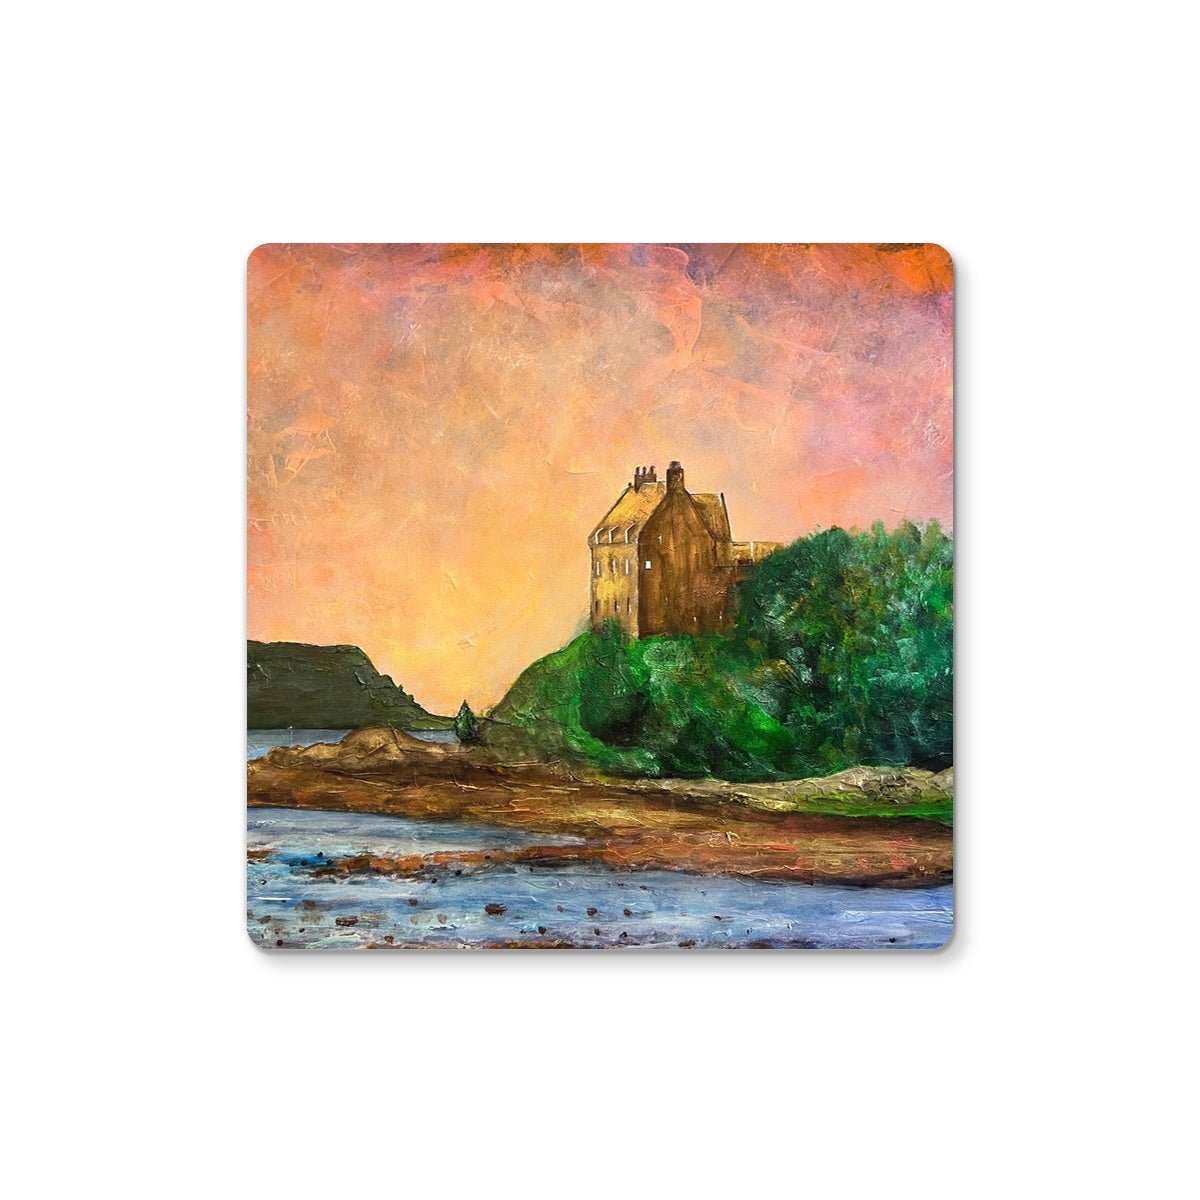 Duntrune Castle Art Gifts Coaster-Coasters-Historic & Iconic Scotland Art Gallery-Single Coaster-Paintings, Prints, Homeware, Art Gifts From Scotland By Scottish Artist Kevin Hunter